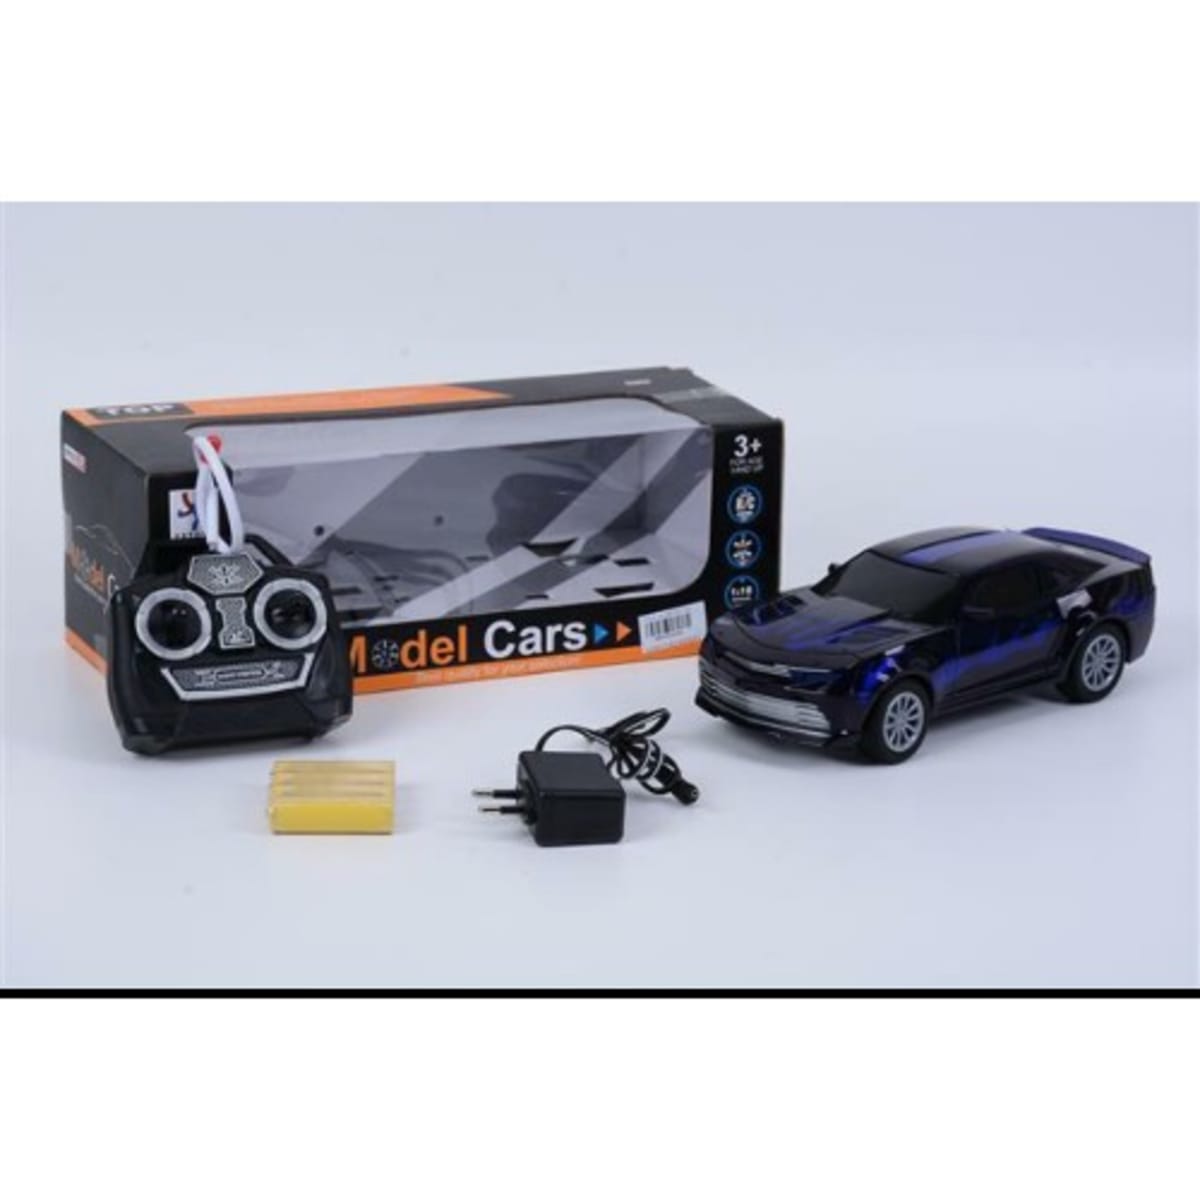 Kids Toy Car With Remote Control